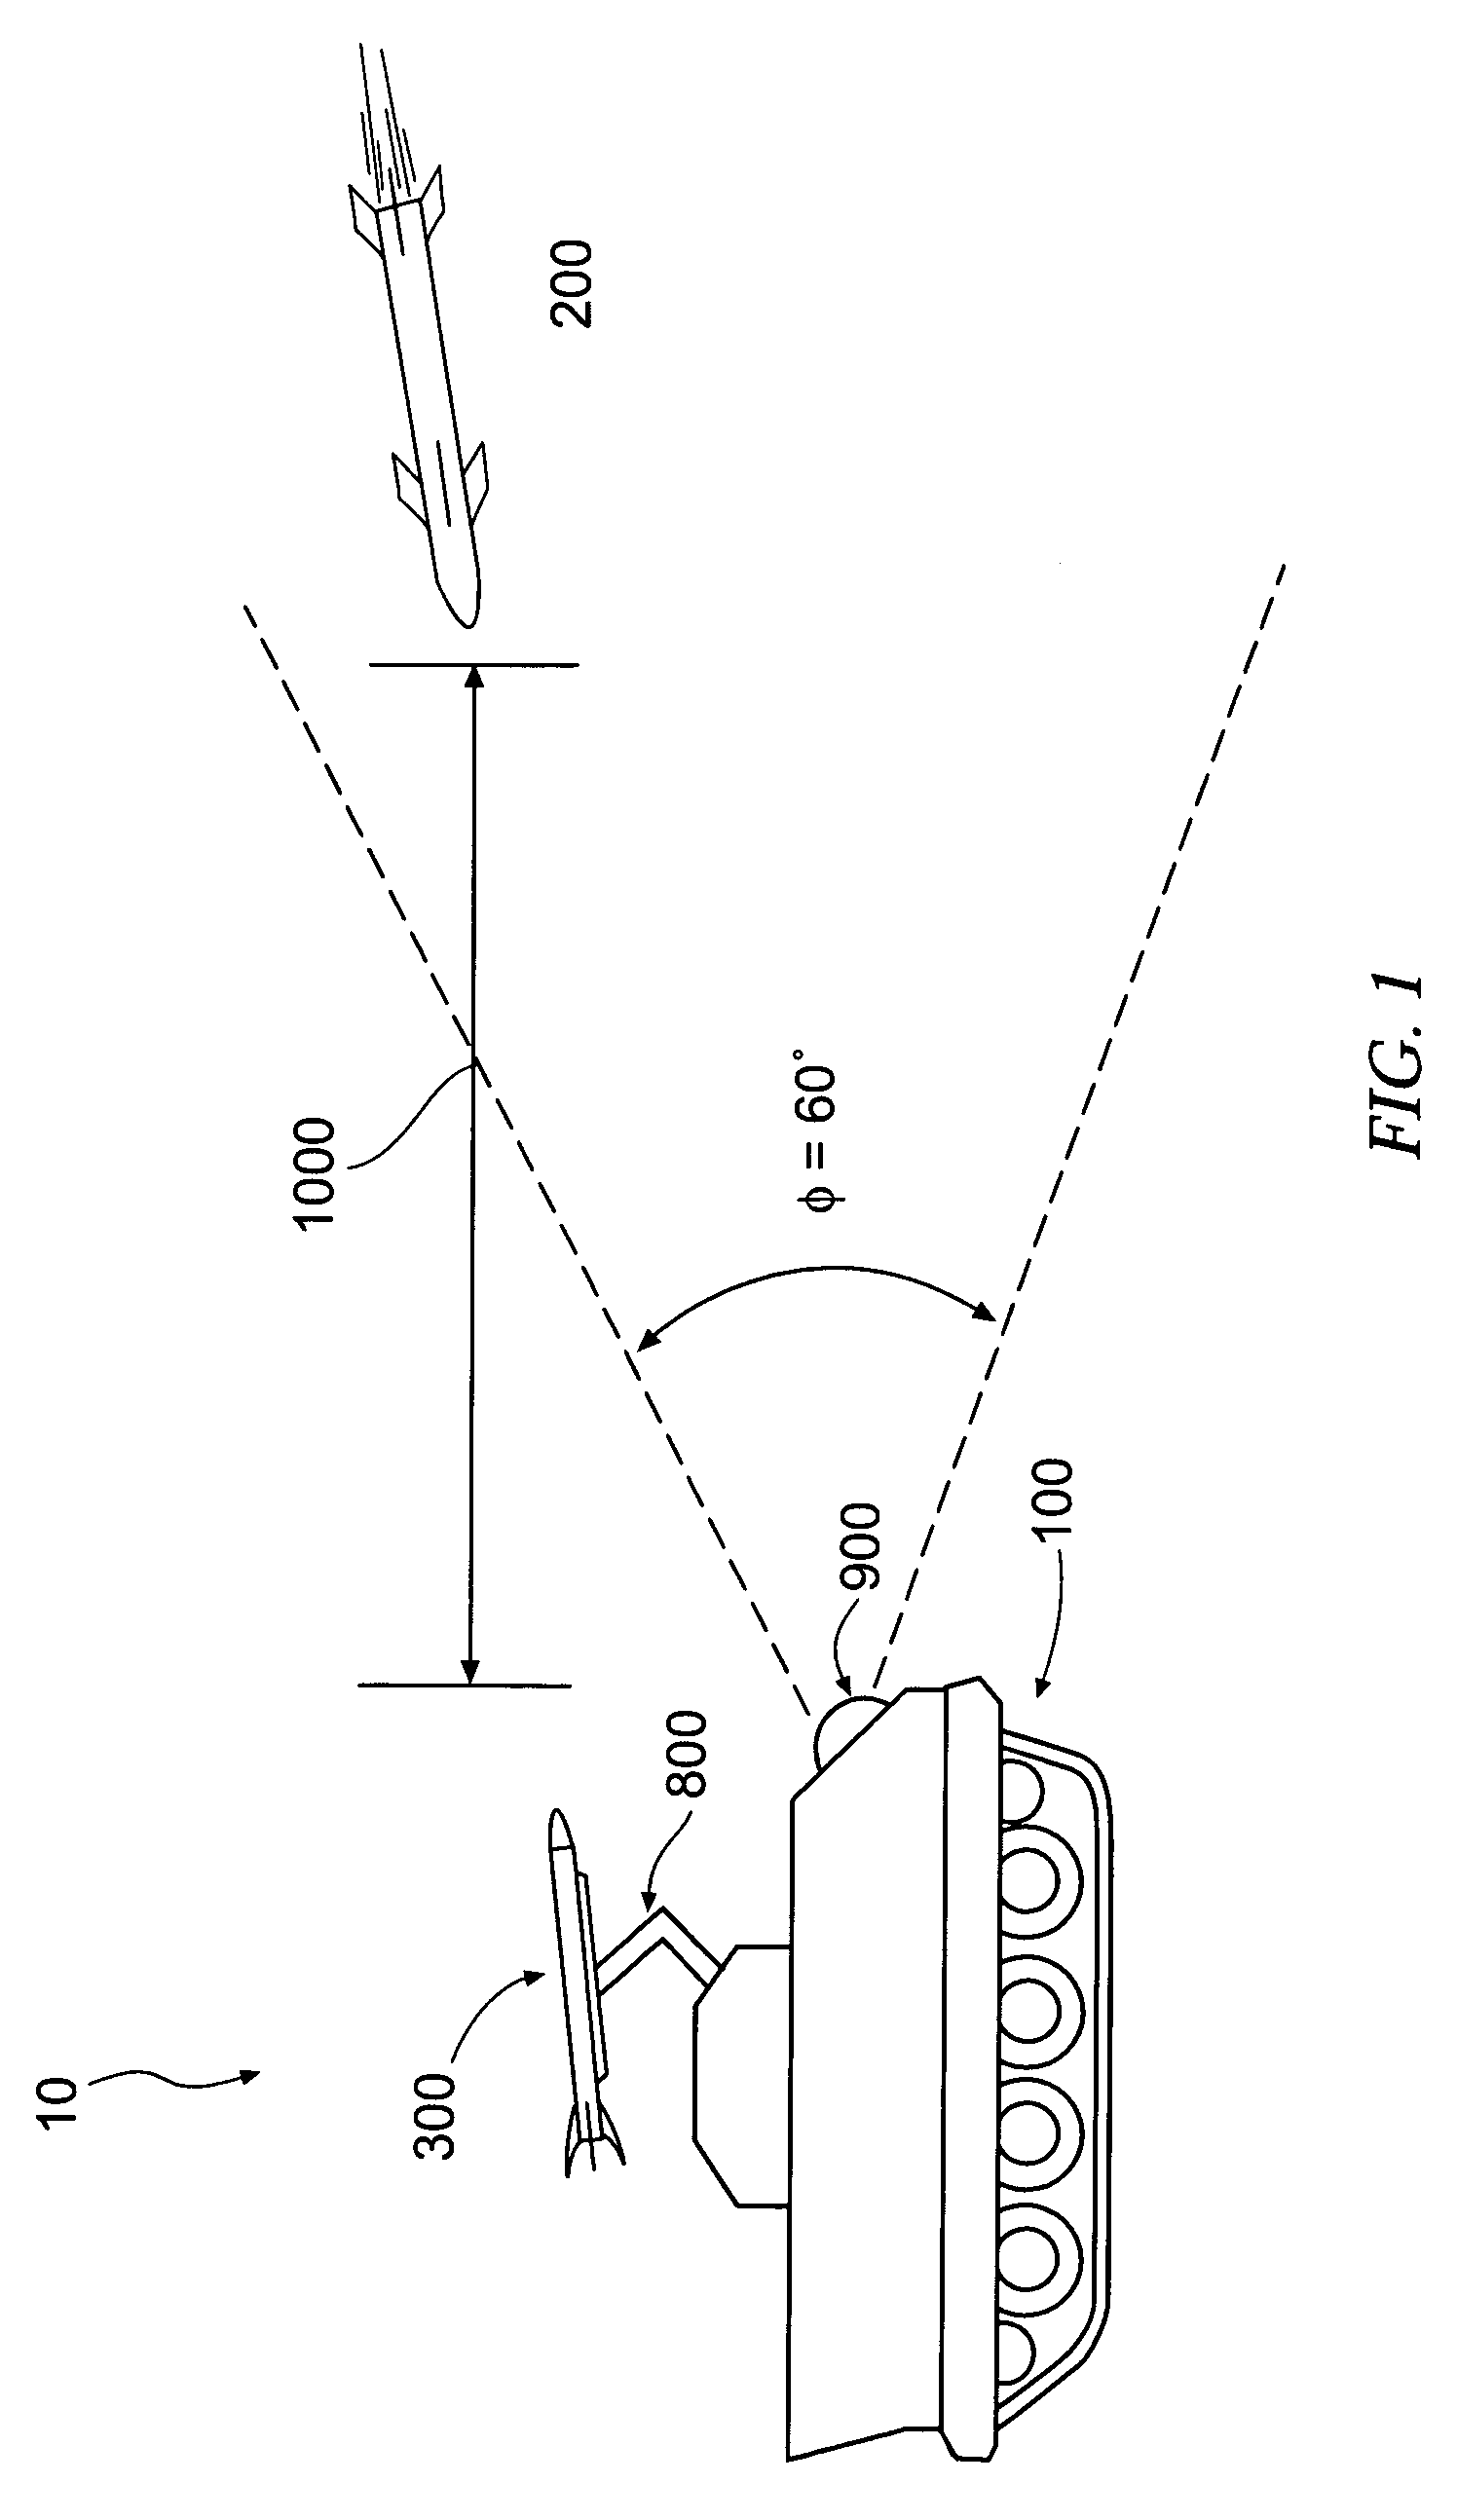 Active protection device and associated apparatus, system, and method